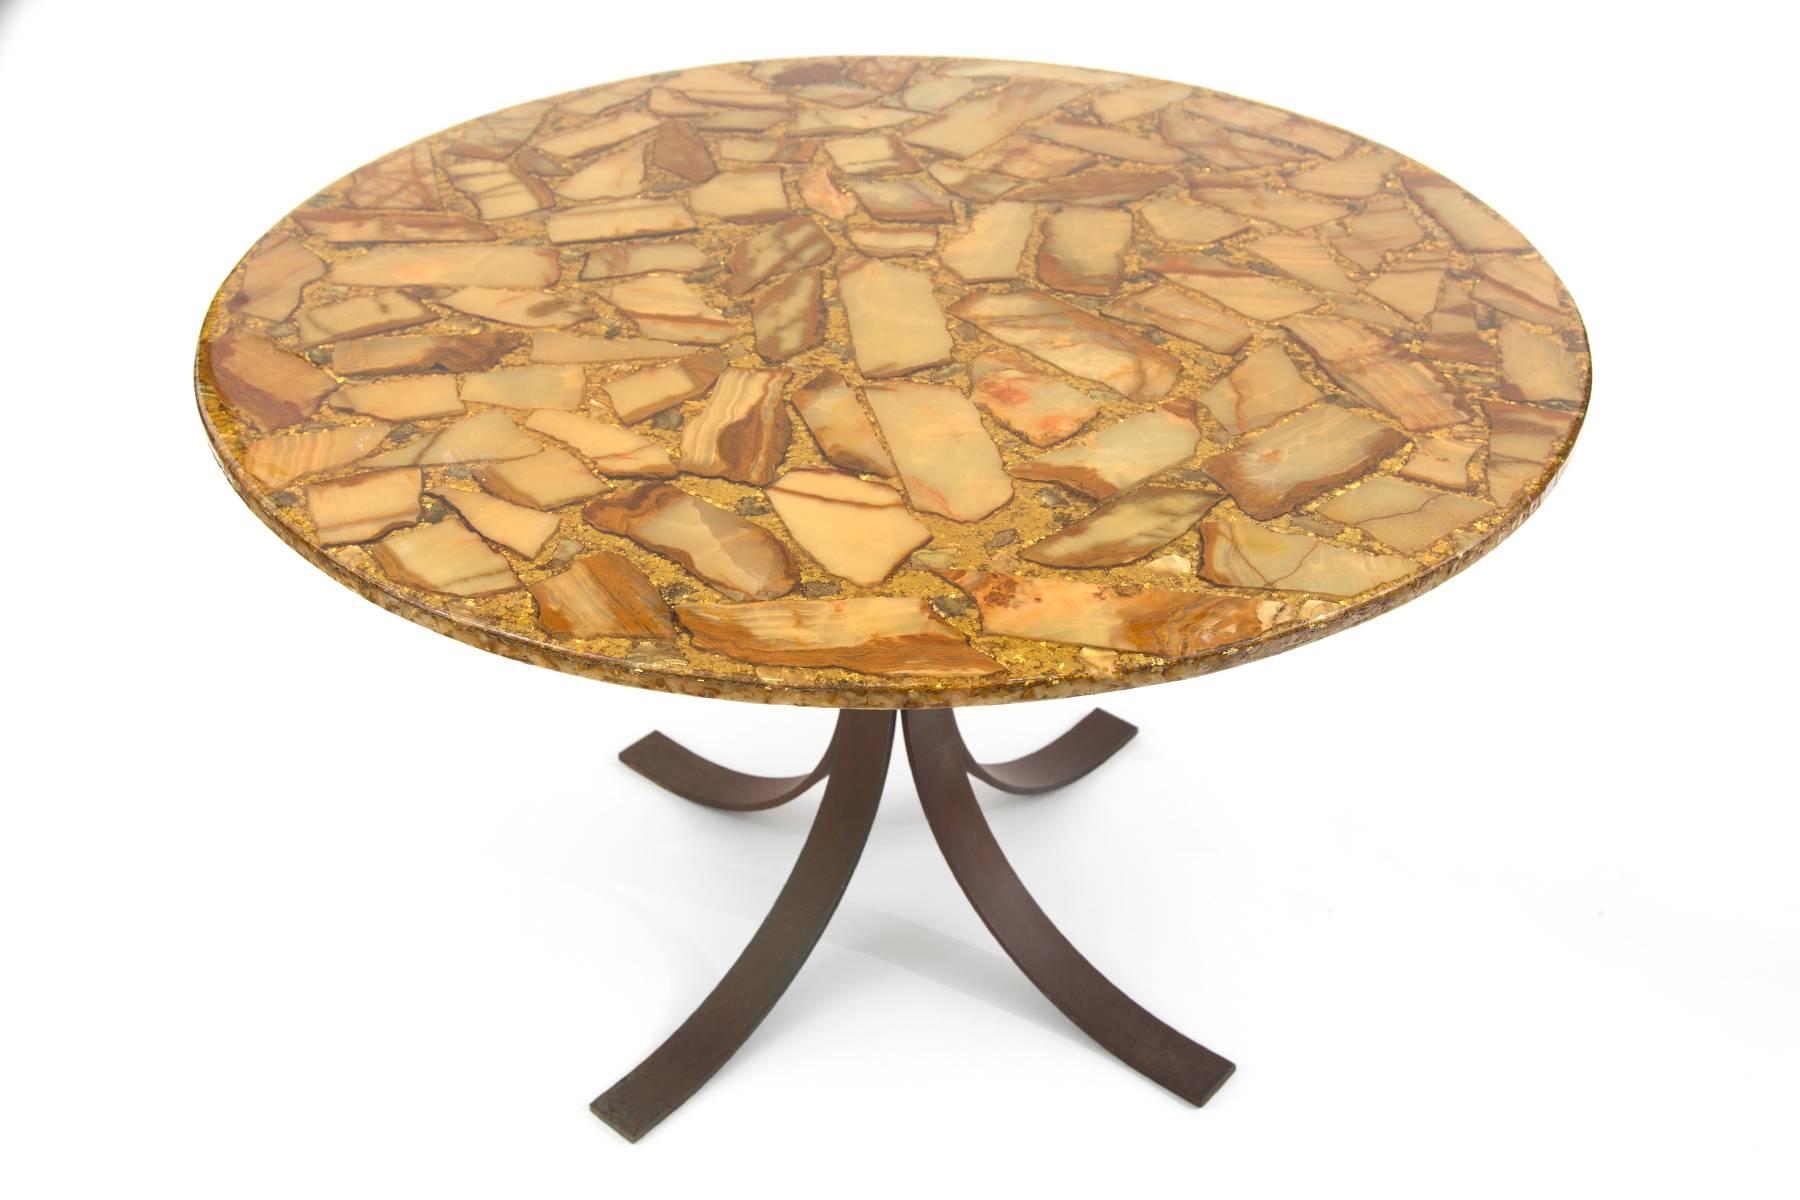 Gold-Flecked Agate and Bronze Dining Table, 1960s (Mexikanisch)